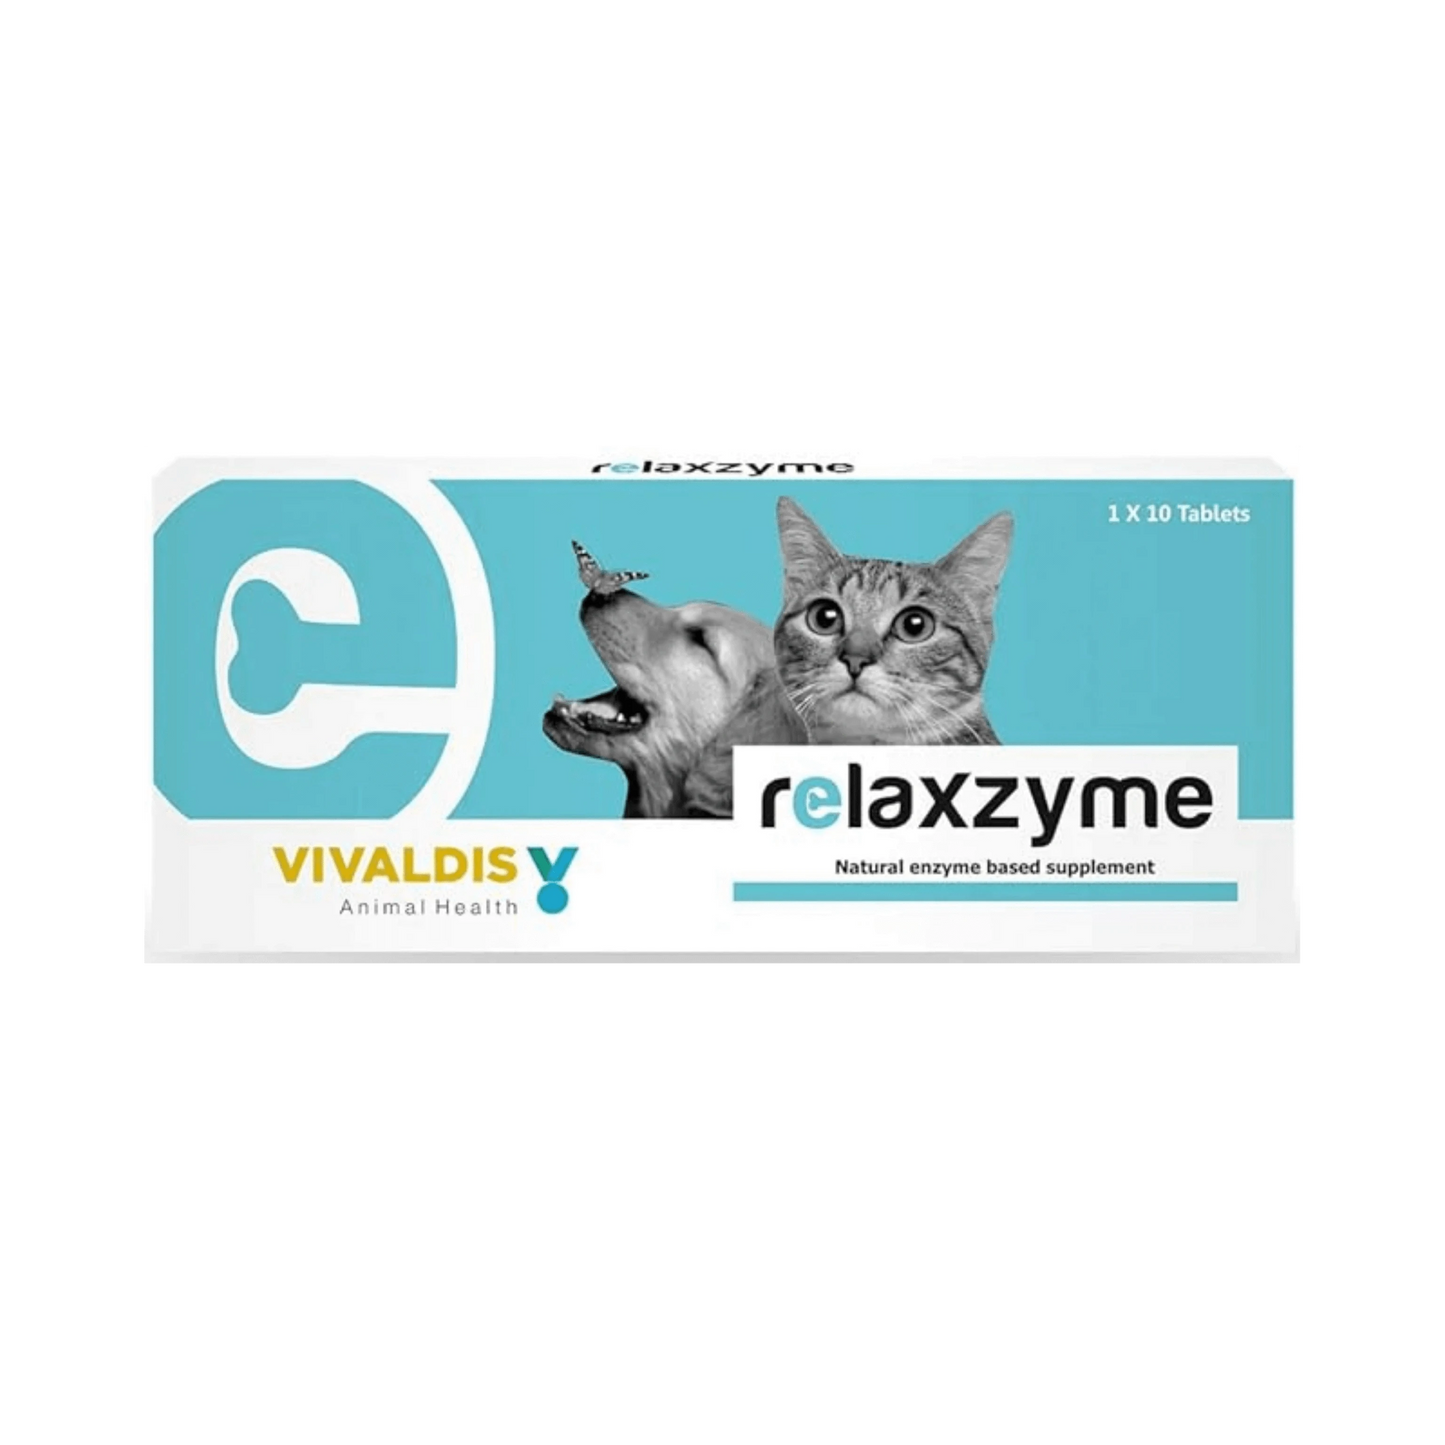 RELAXZYME SMALL TABLET 10TAB